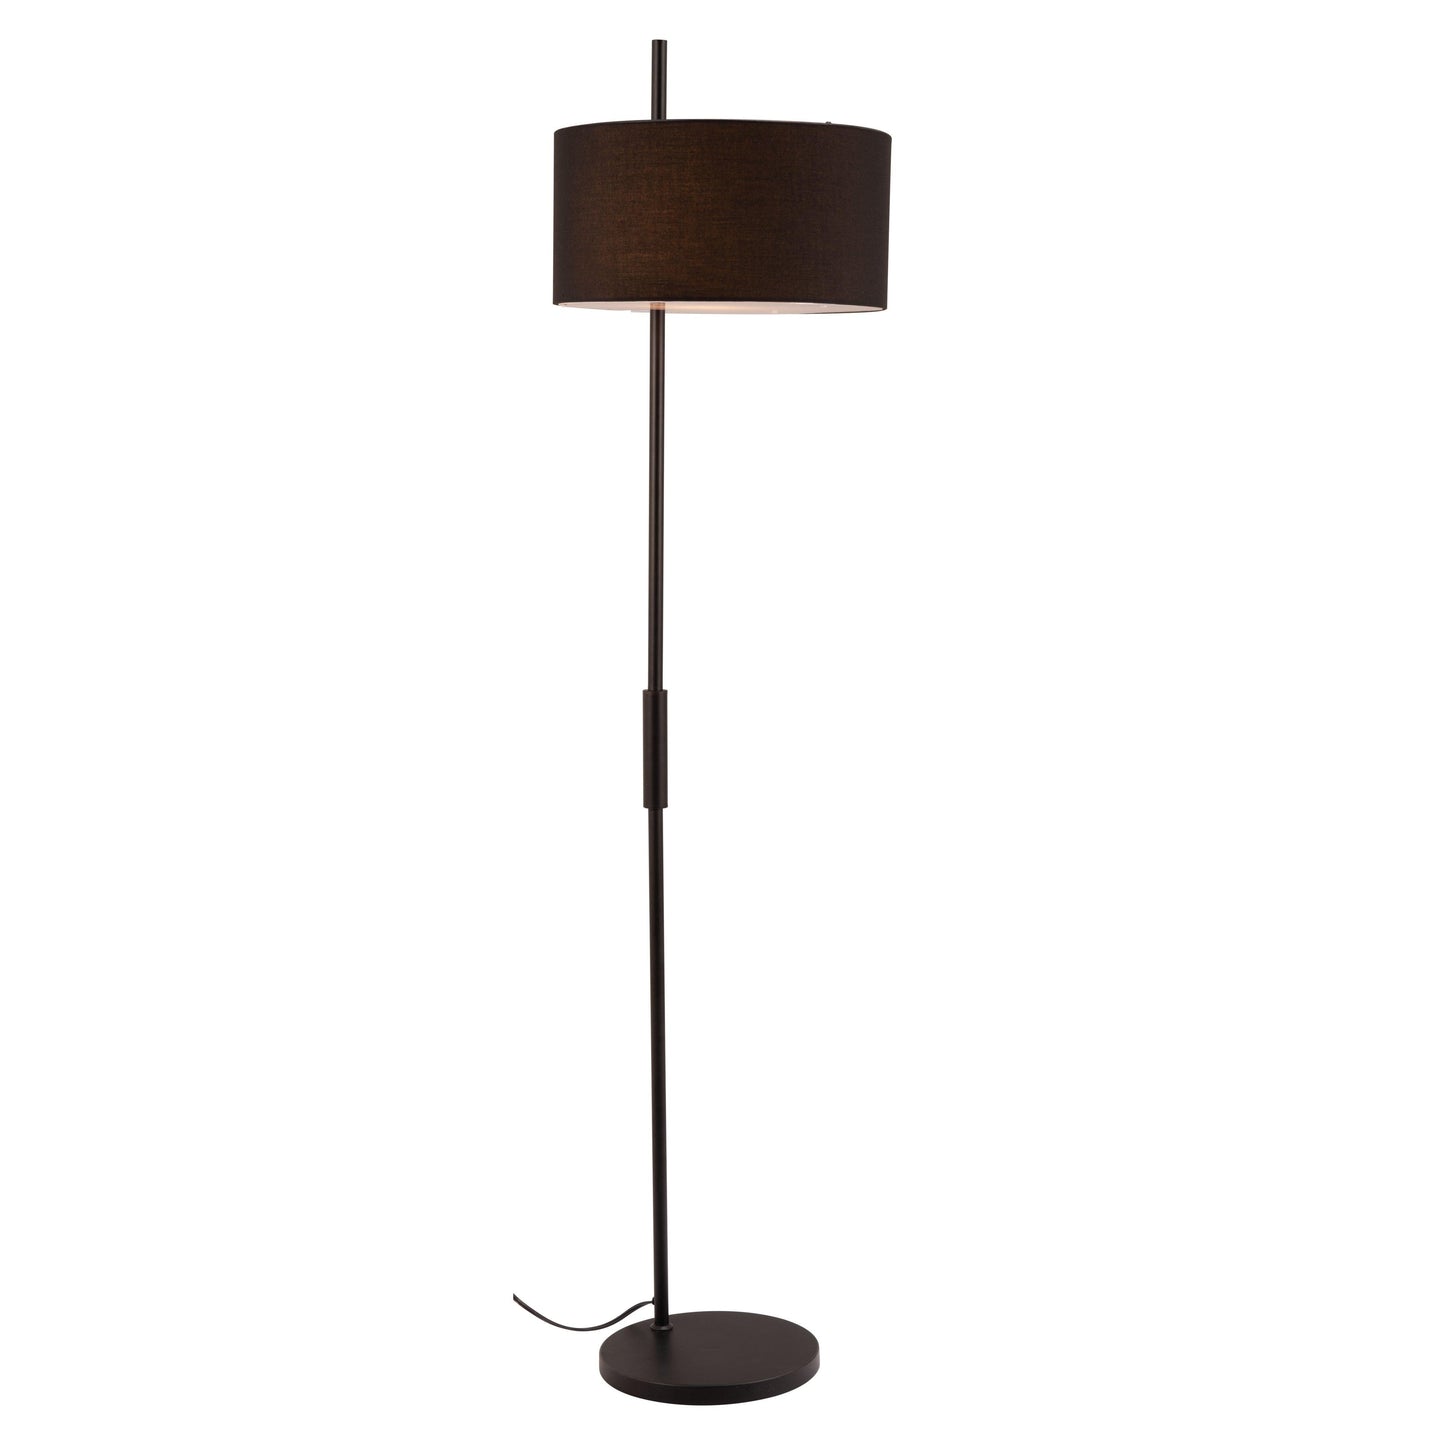 Lonte Floor Lamp Black - Sideboards and Things Brand_Zuo Modern, Color_Black, Depth_10-20, Finish_Powder Coated, Height_60-70, Materials_Metal, Metal Type_Steel, Product Type_Floor Lamp, Upholstery Type_Fabric Blend, Upholstery Type_Polyester, Width_10-20